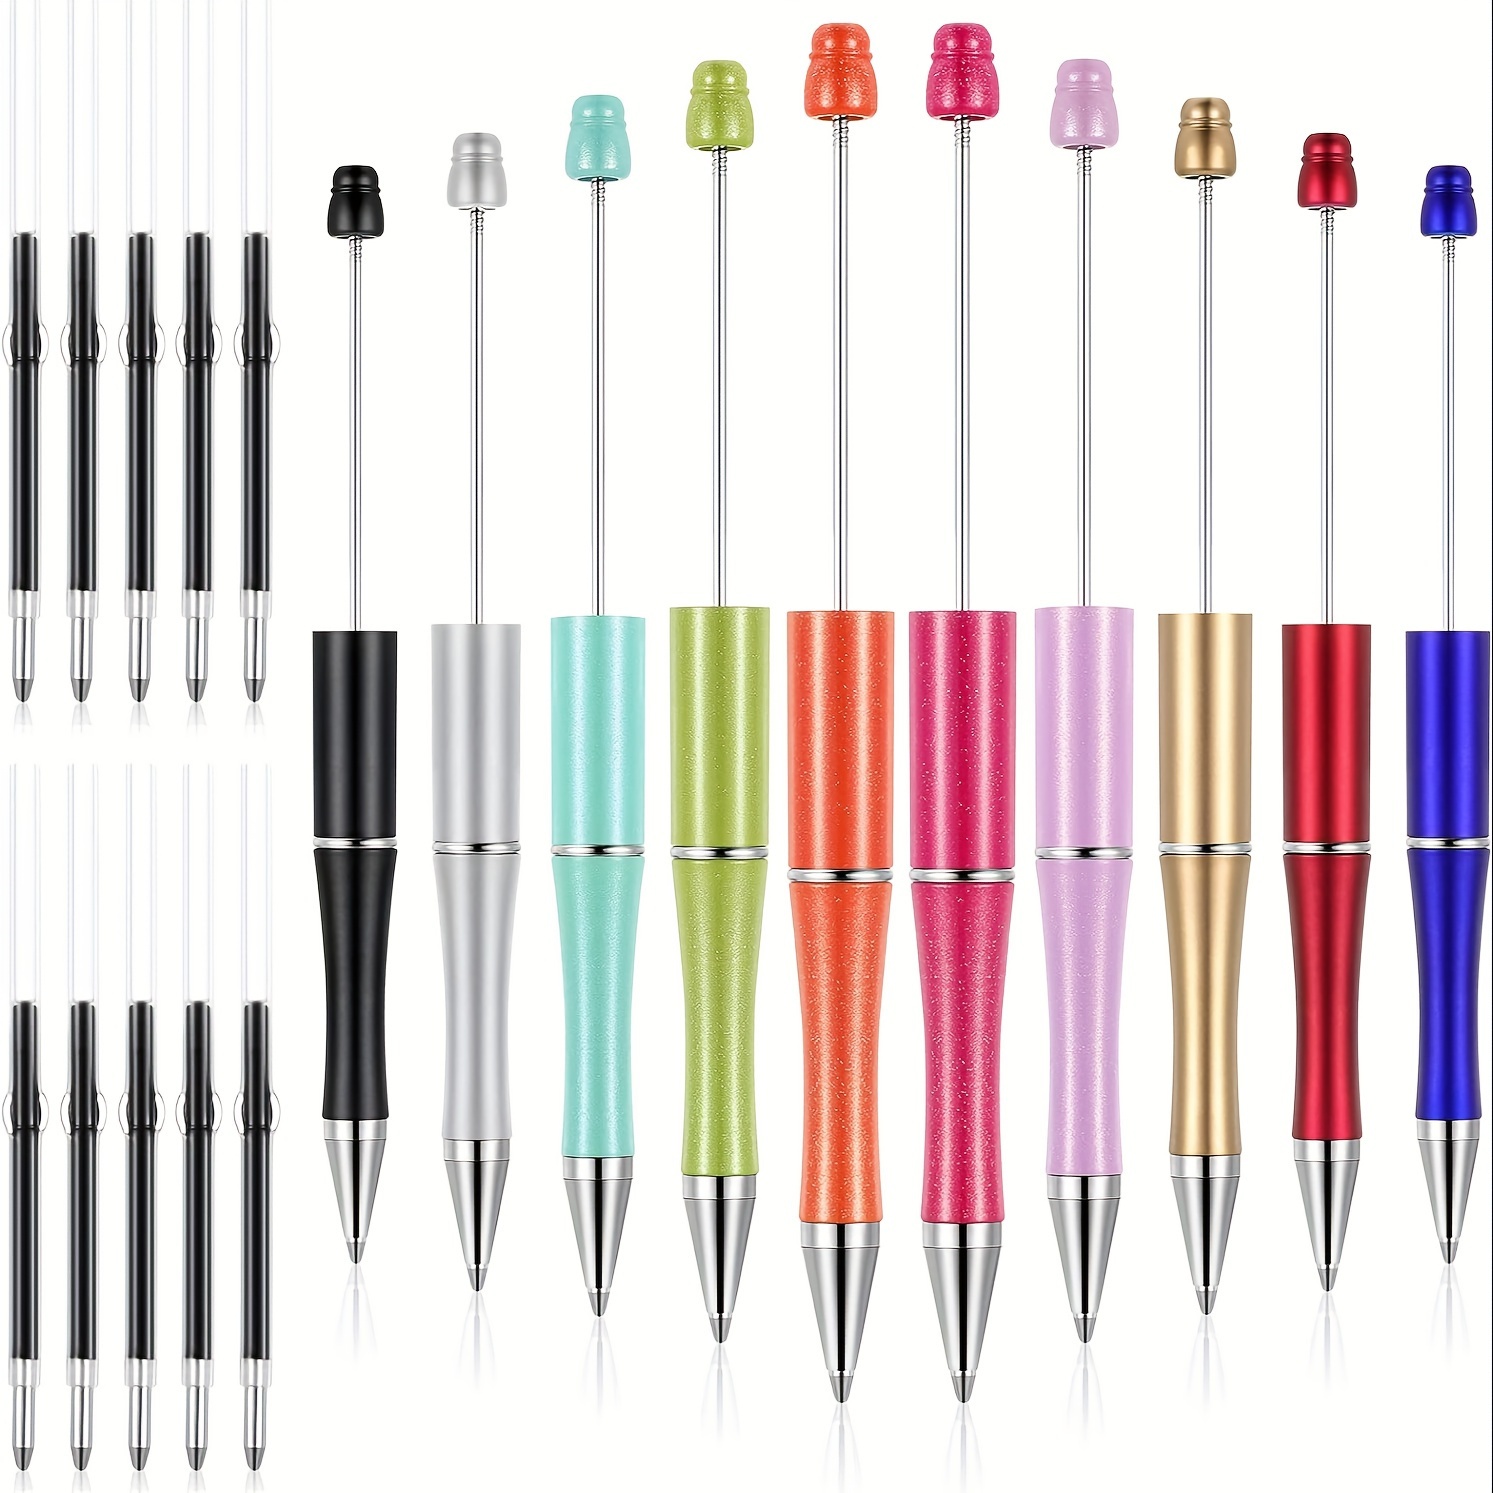 6pcs DIY Beadable Ballpoint Pens - Perfect for School, Office, or Wedding  Gifts!